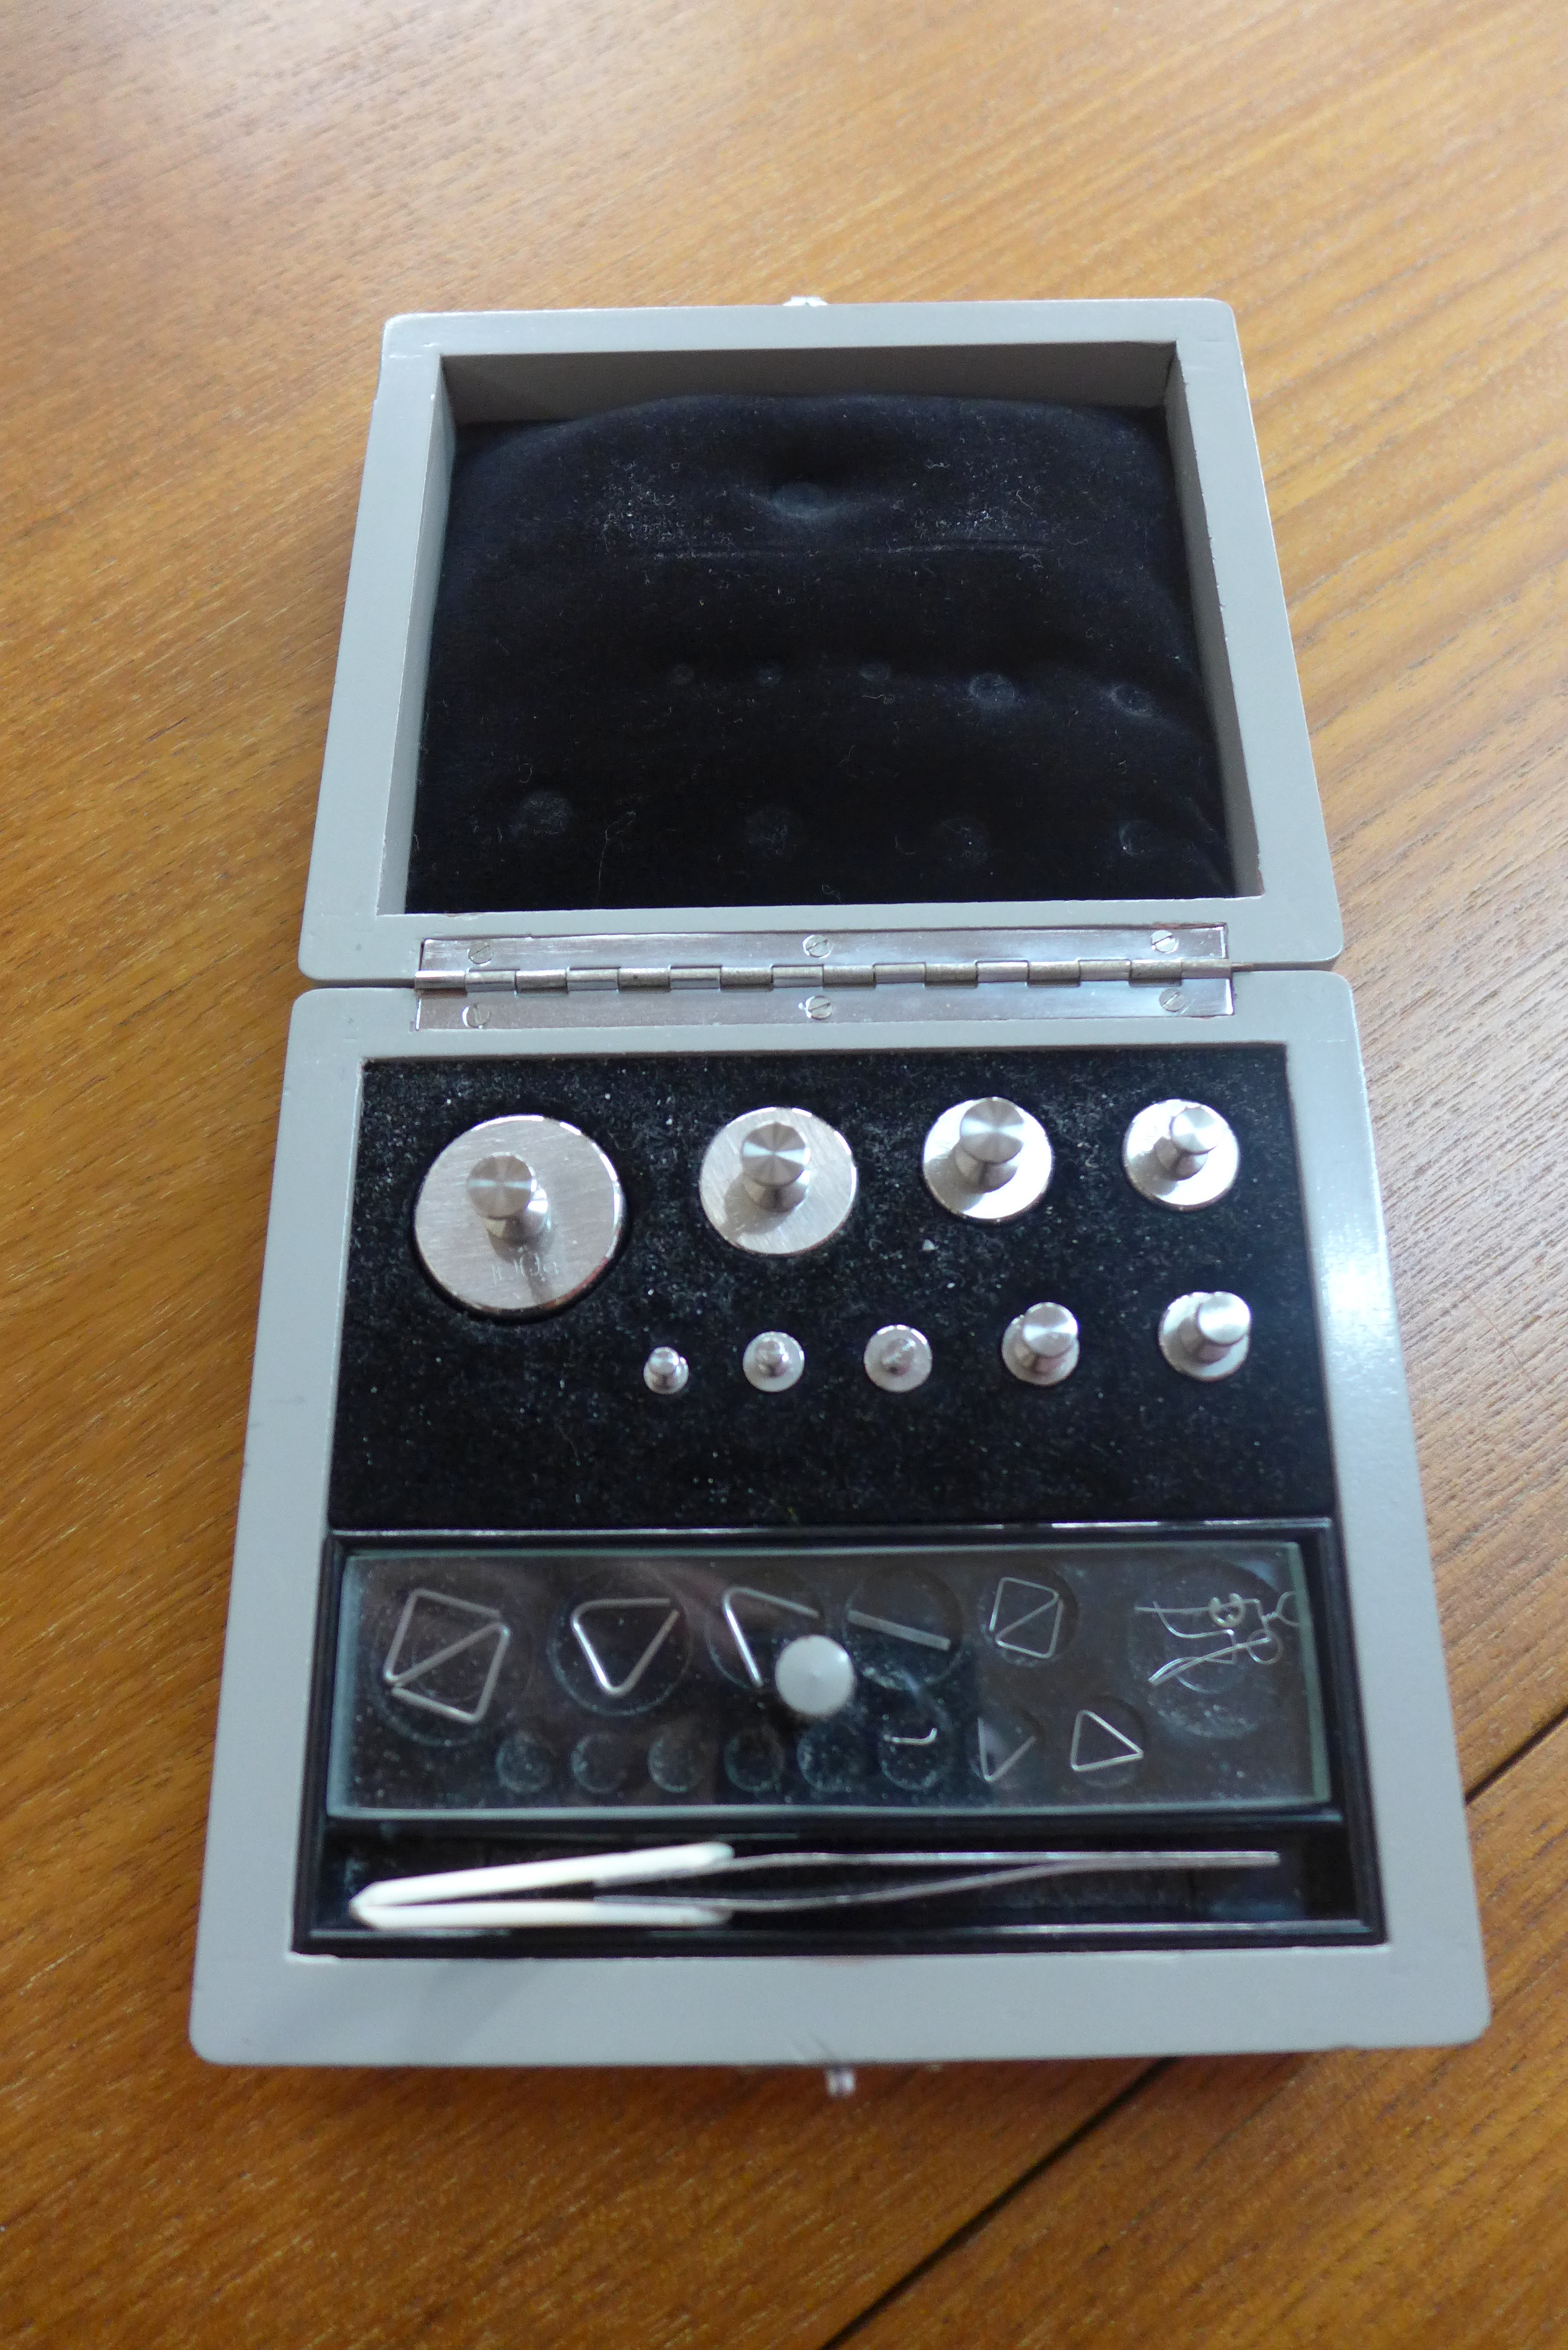 A mahogany and glass cased set of chemist balance scales - Image 3 of 4